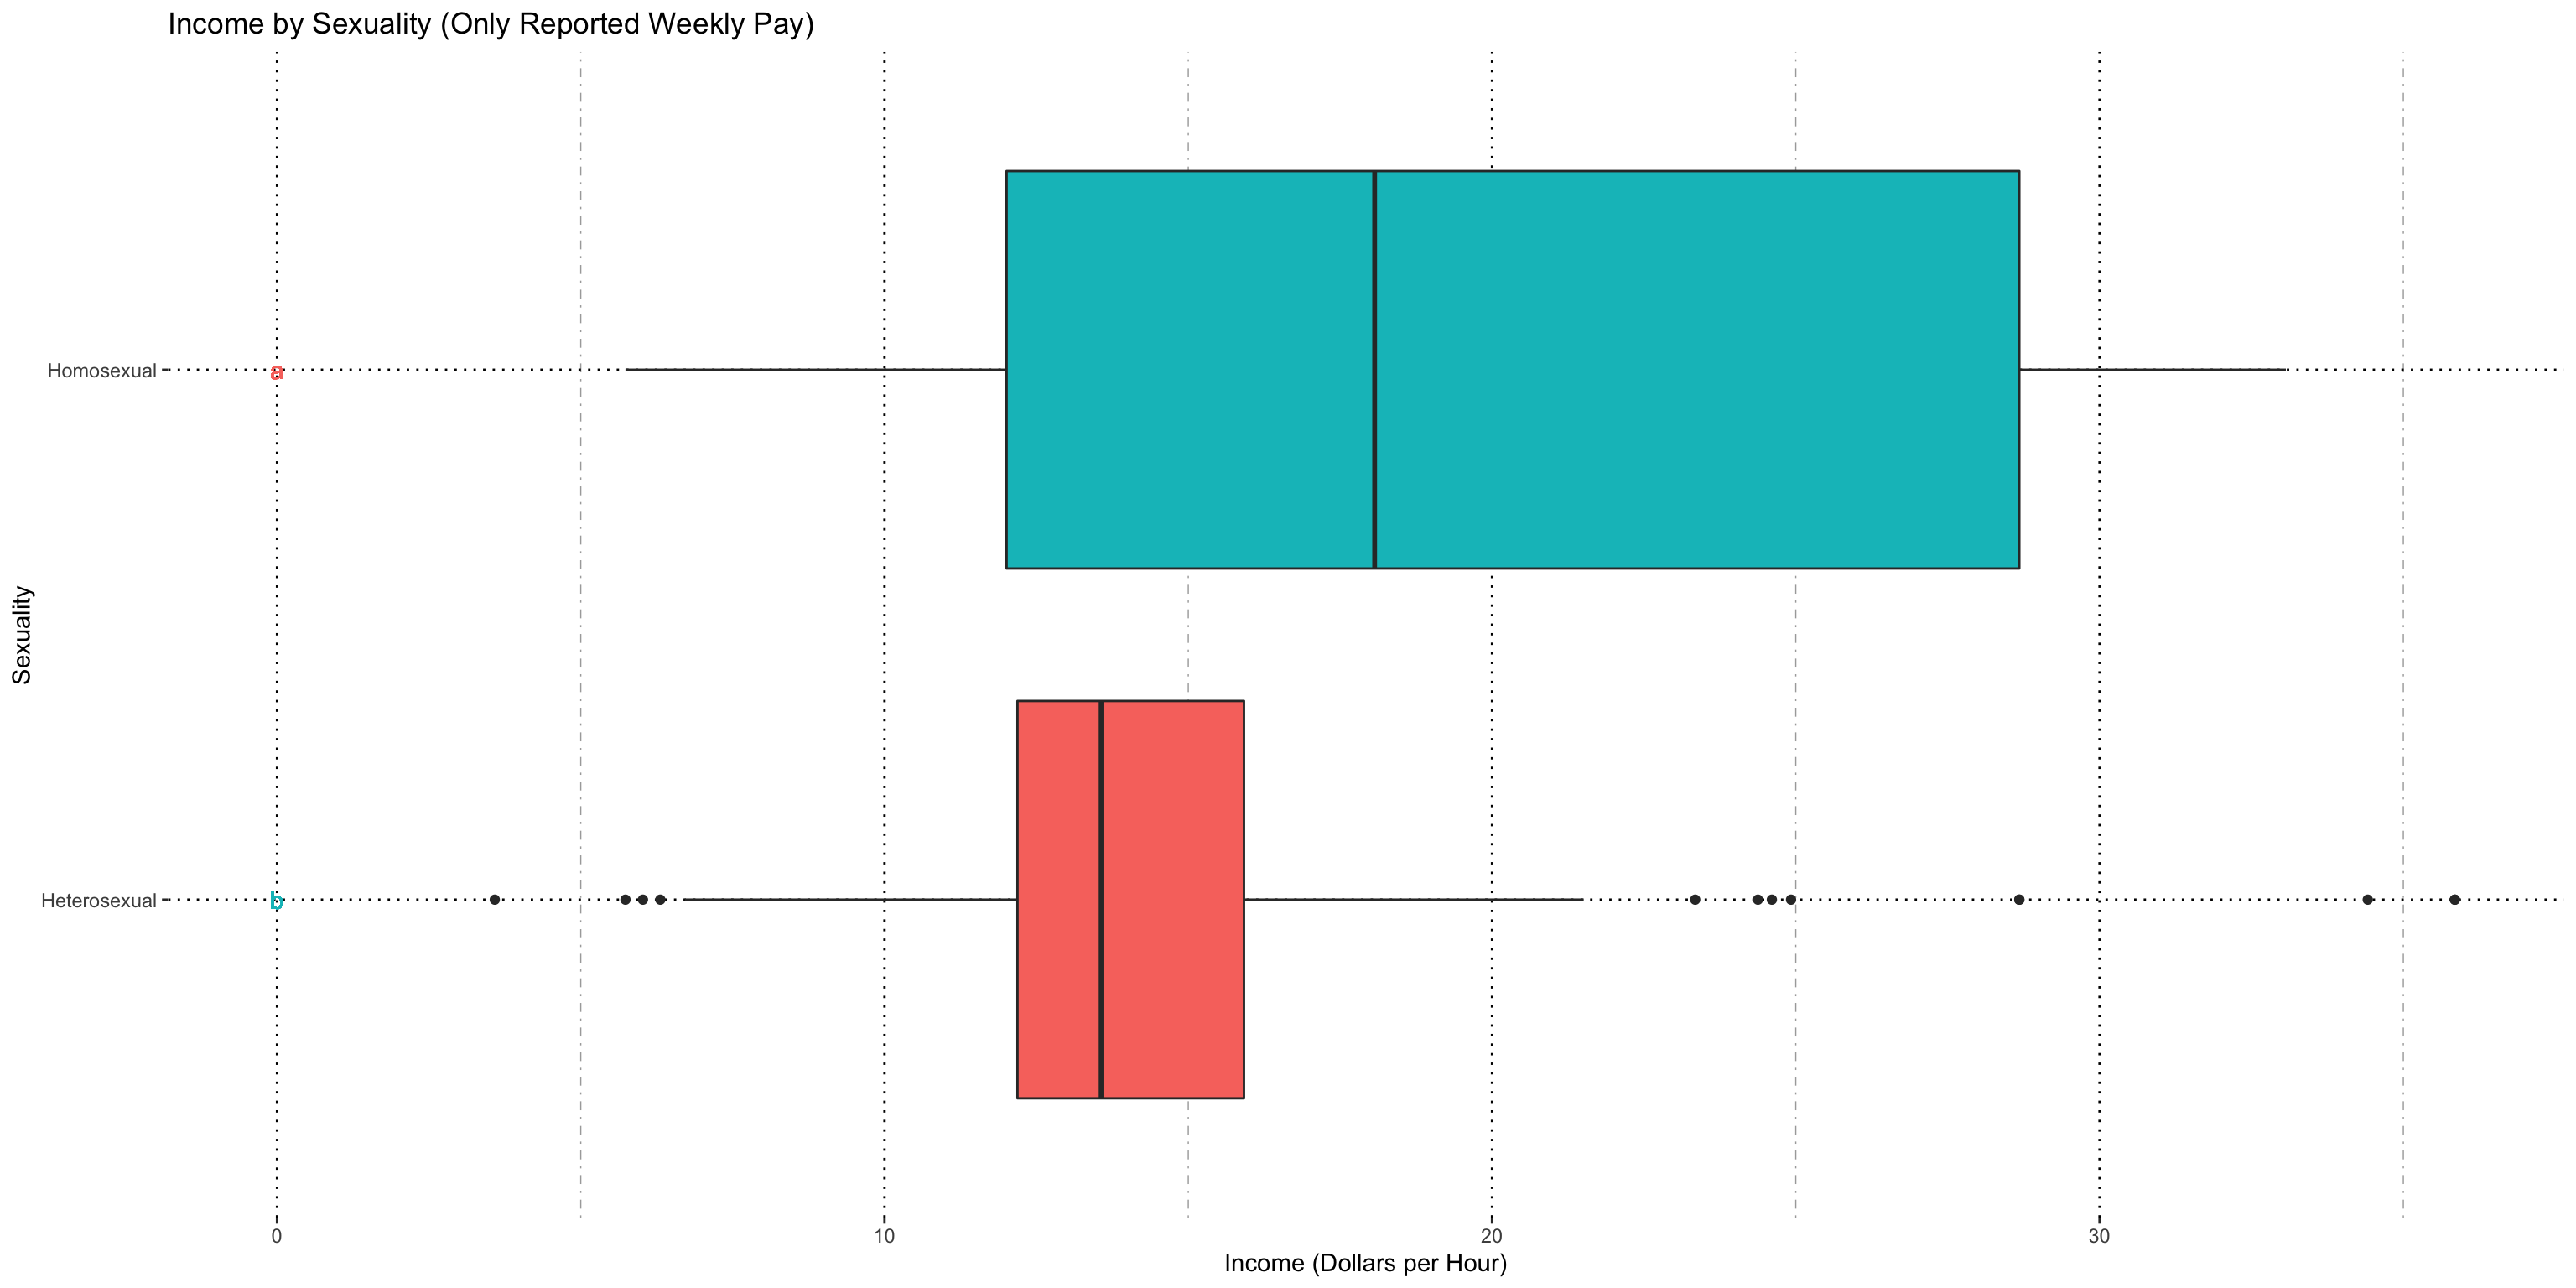 Tukey Groups and Boxplot Income by Sexuality (Only Paid Weekly)